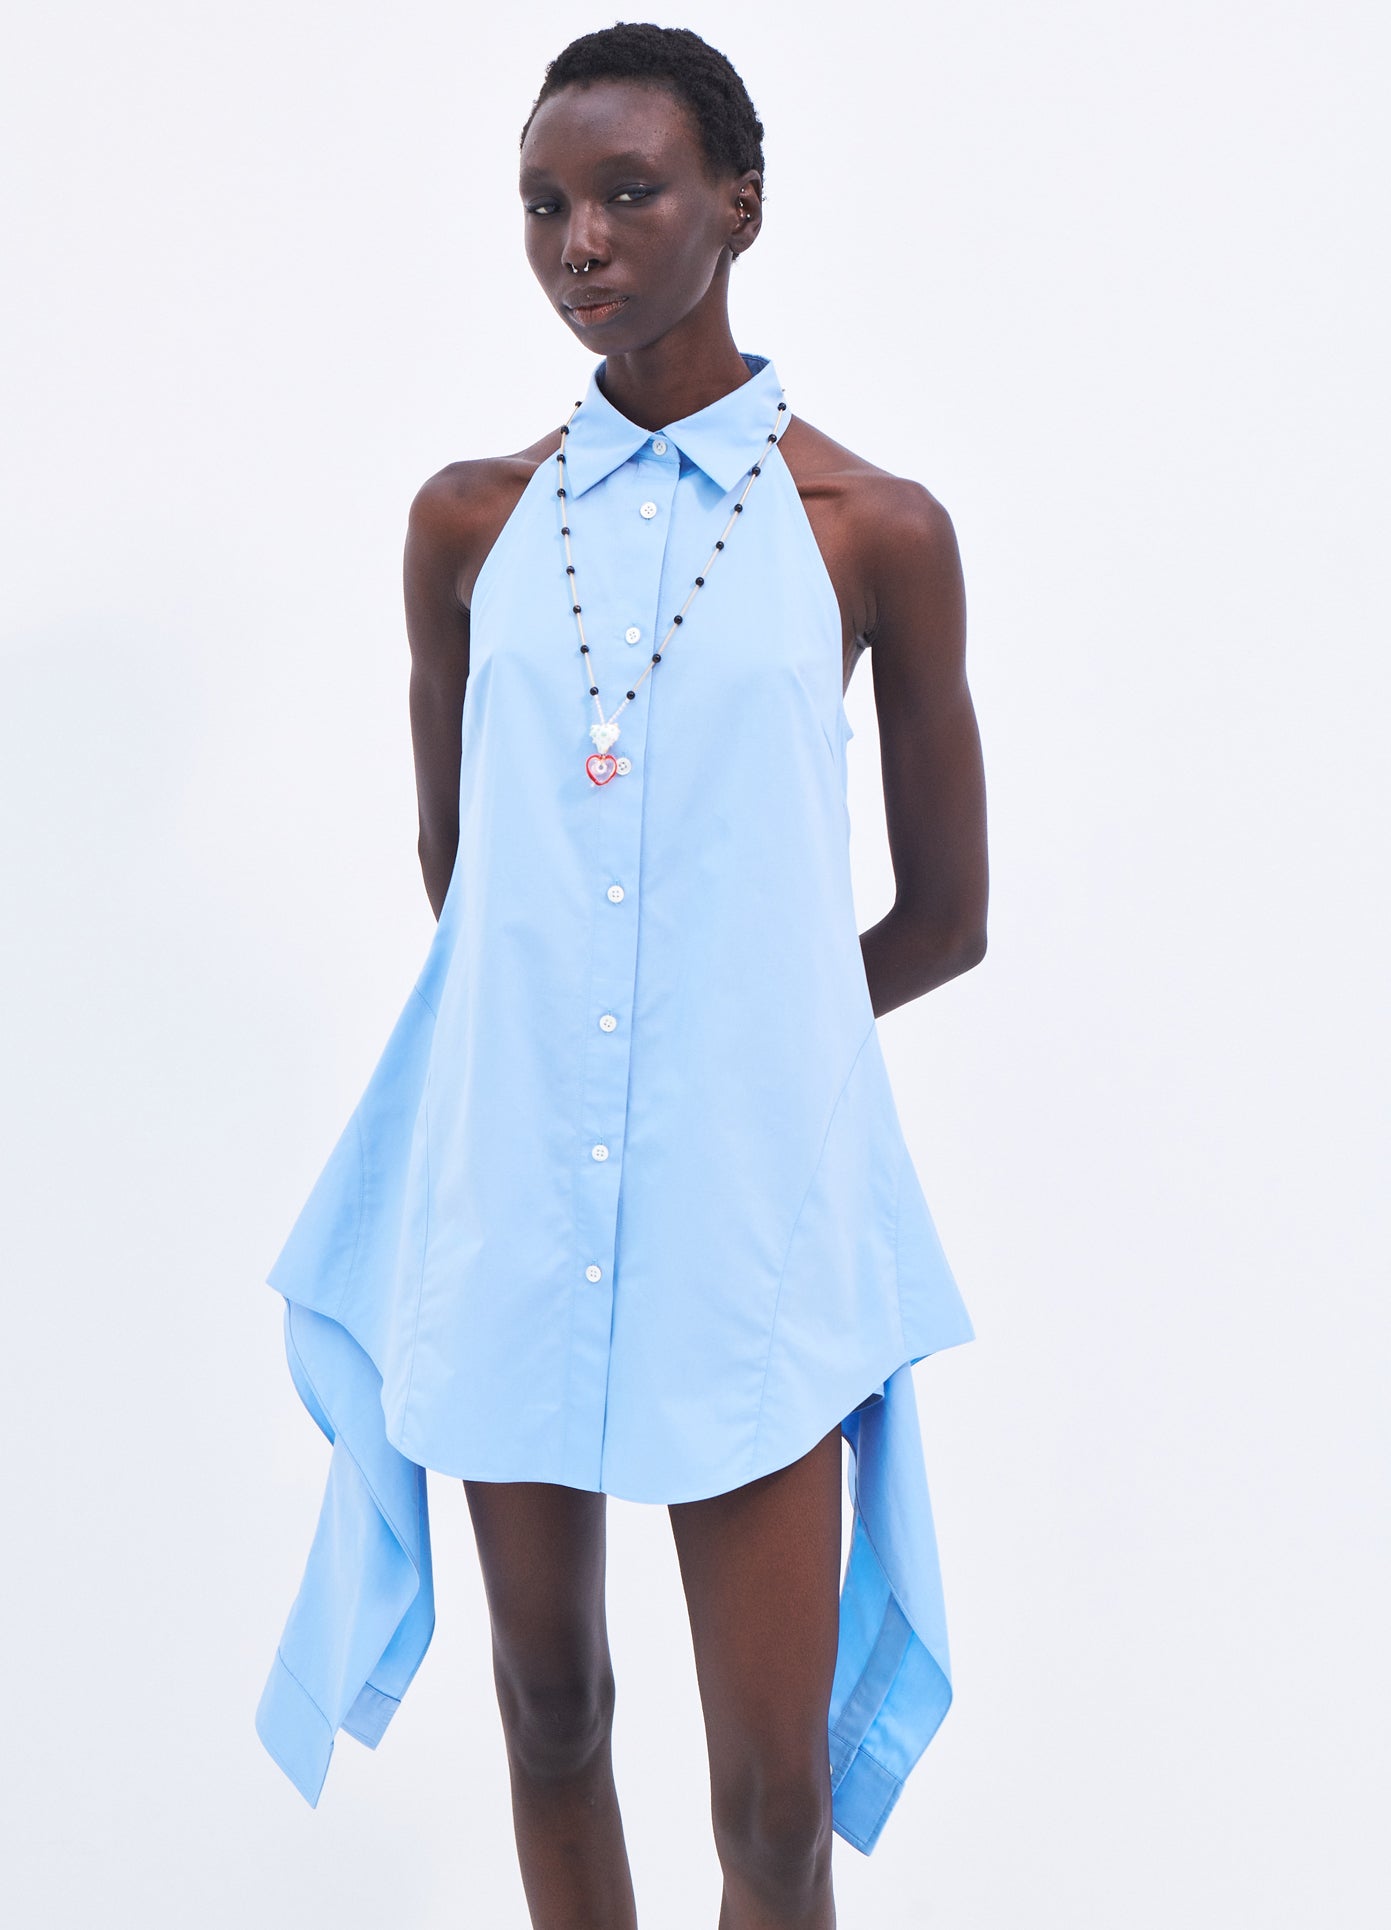 MONSE Sleeveless Deconstructed Halter Shirt in Blue on model front view